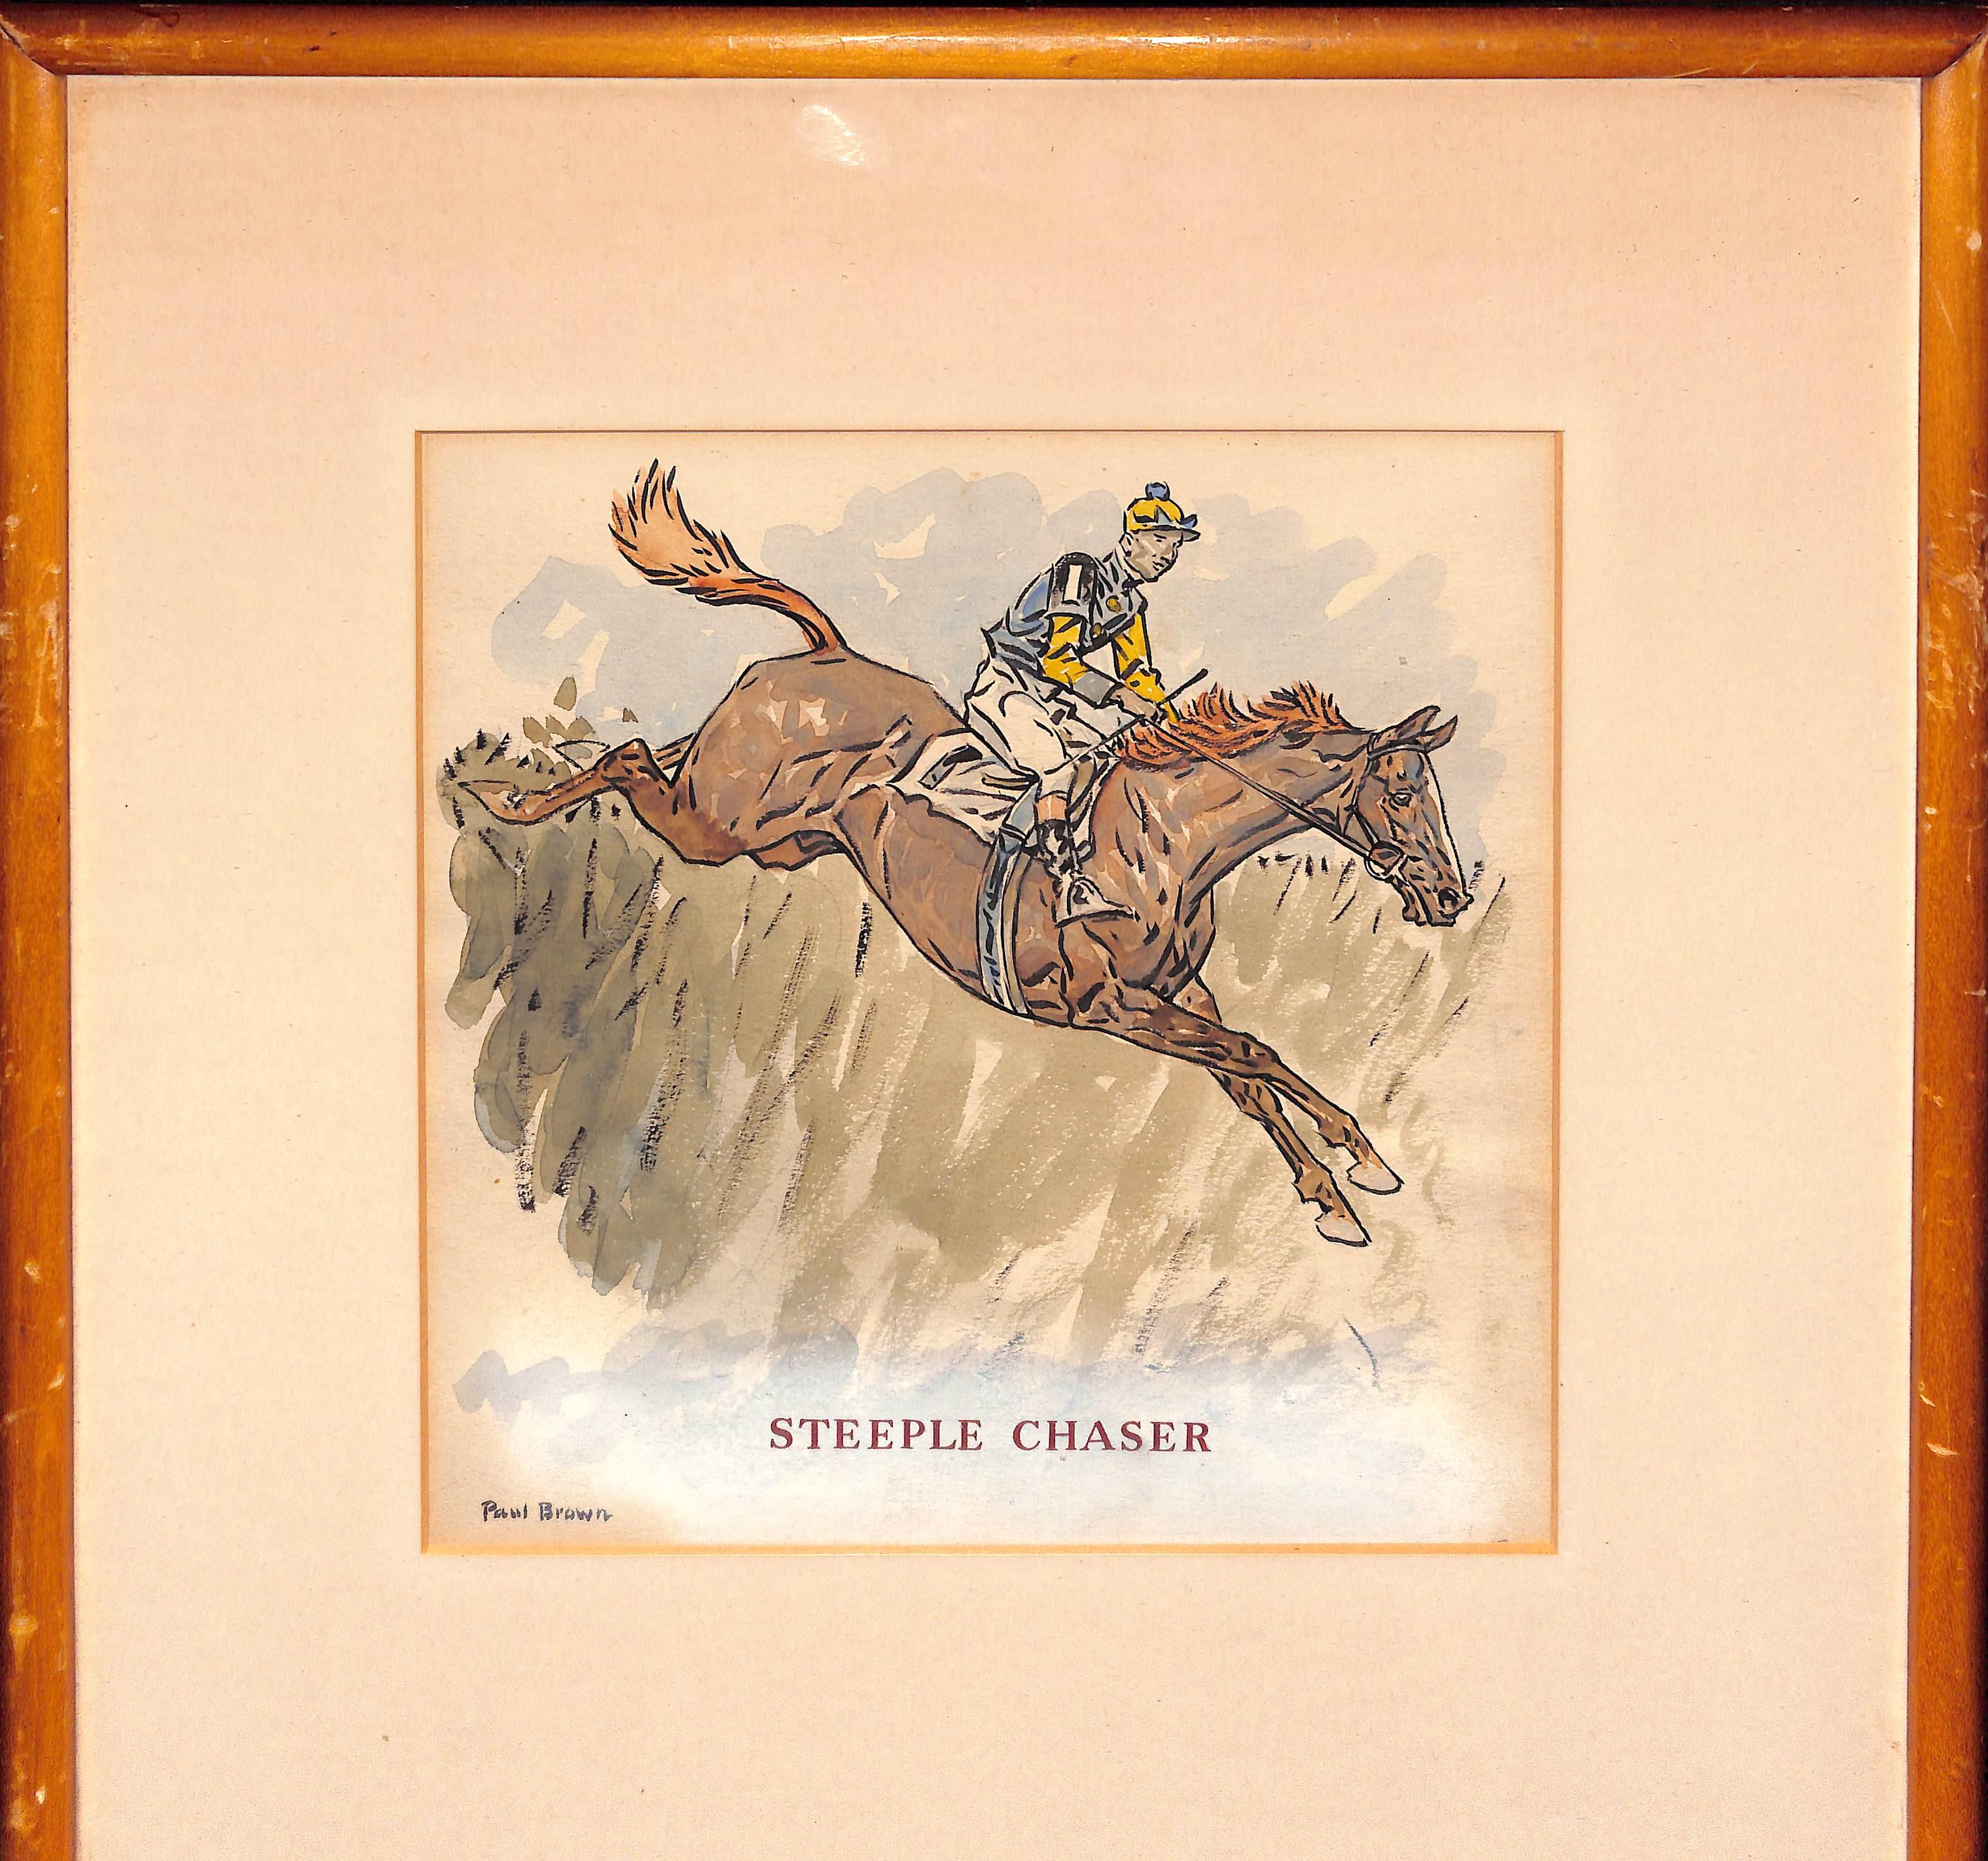 Paul Desmond Brown (1893 – 1958)
Steeple Chaser
Watercolor painting on paper
Signed to the lower left

Art Sz: 8 1/4